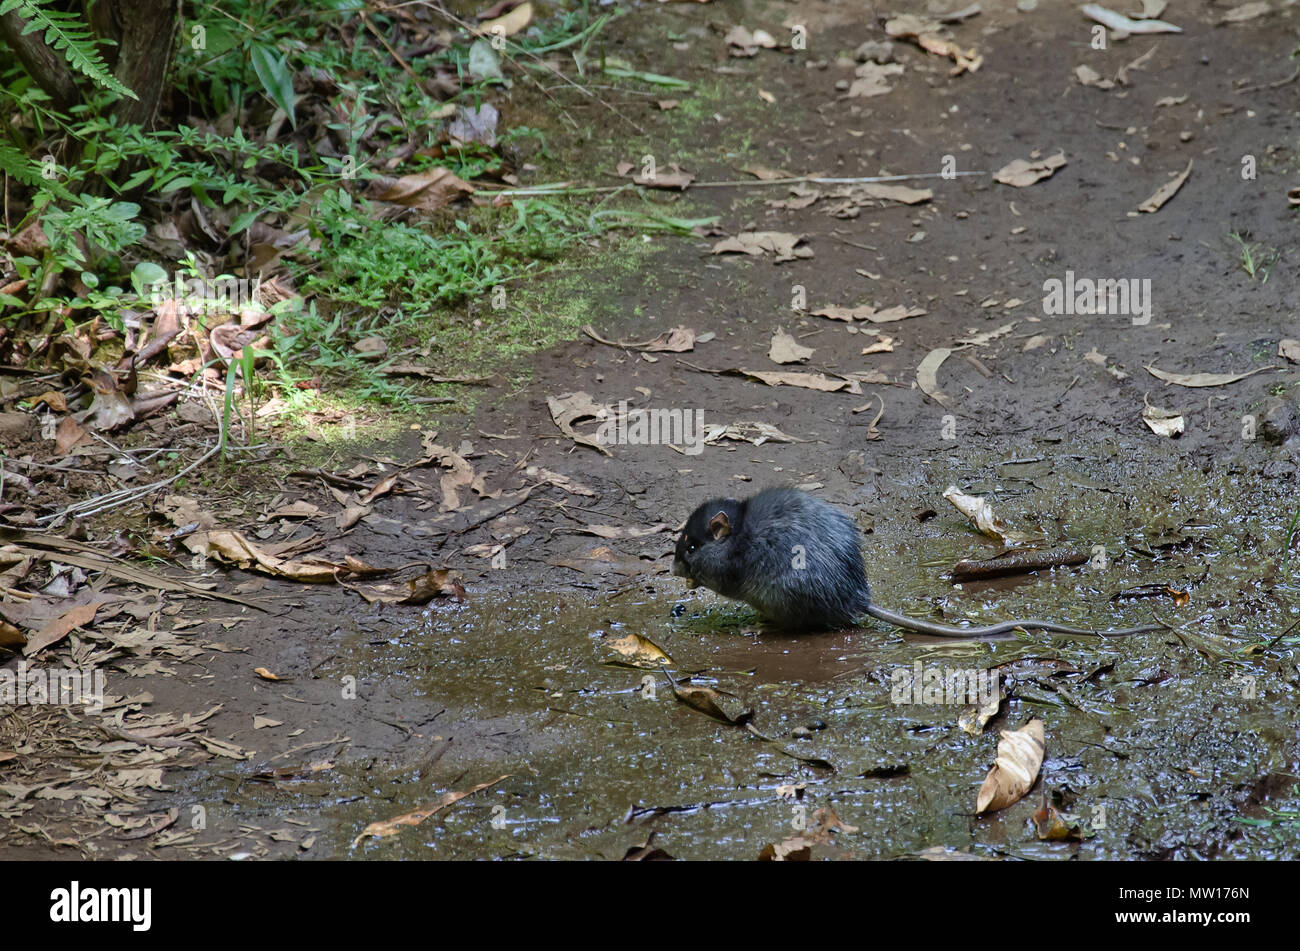 Huge and fat black rat in wild natural environment. Furry pest is sitting and eating something in mud on the ground unsurfaced road. Picture made in M Stock Photo